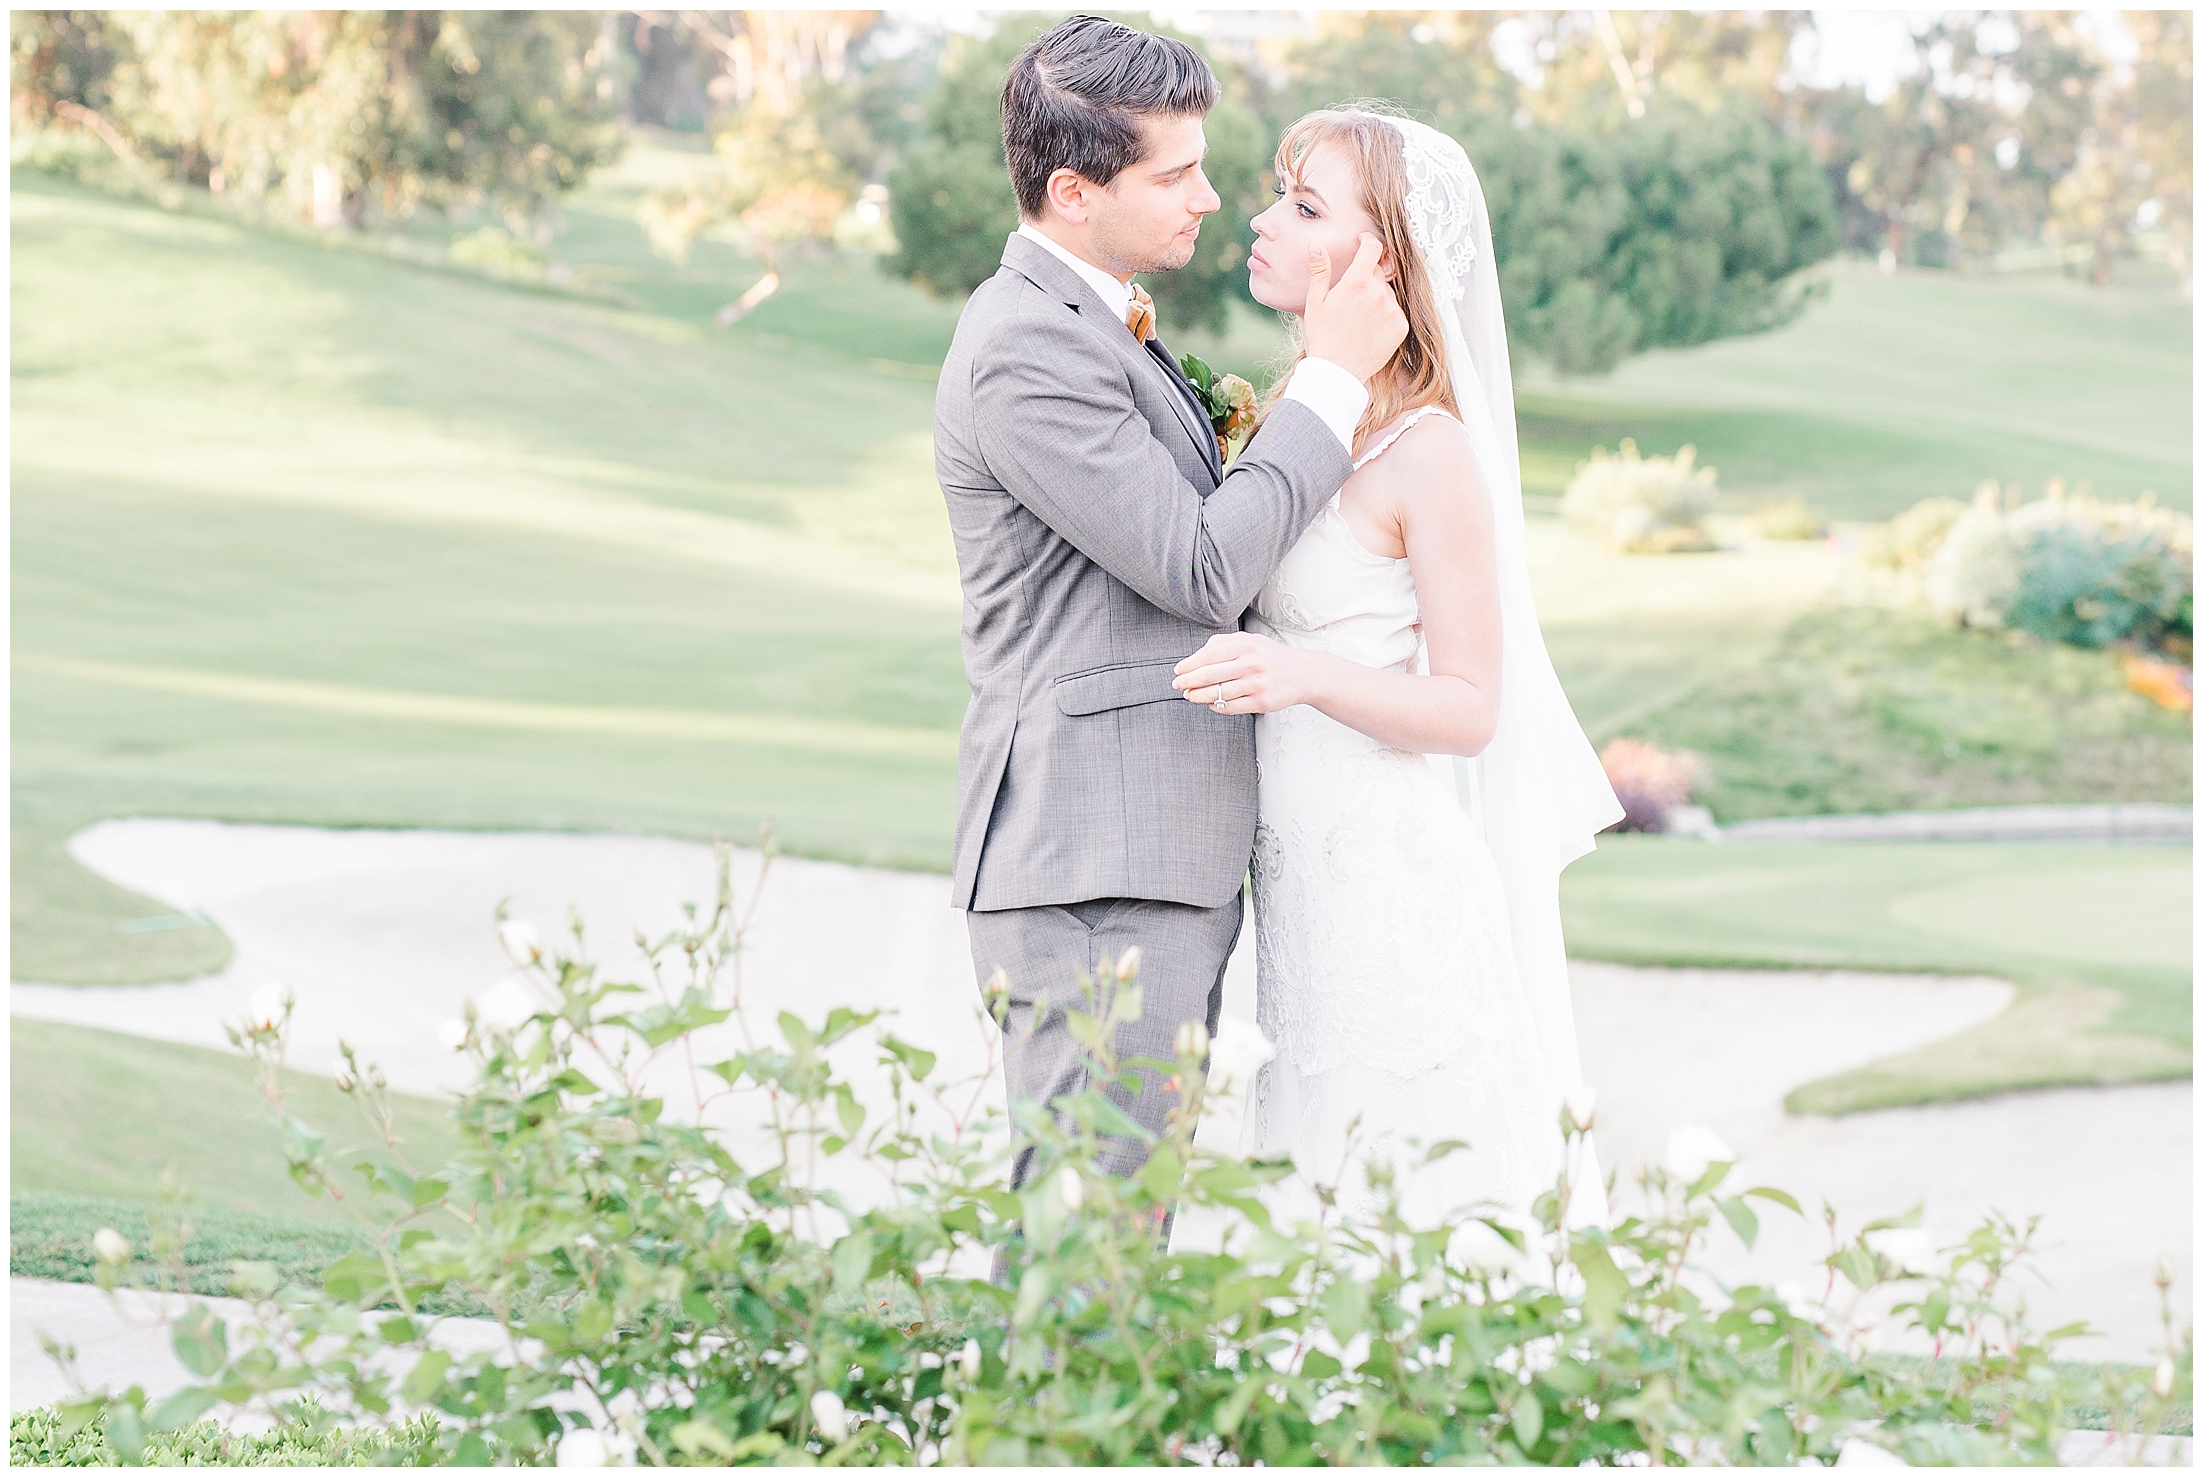 Light and Airy Wedding at Marbella Country Club in Southern Orange County, California